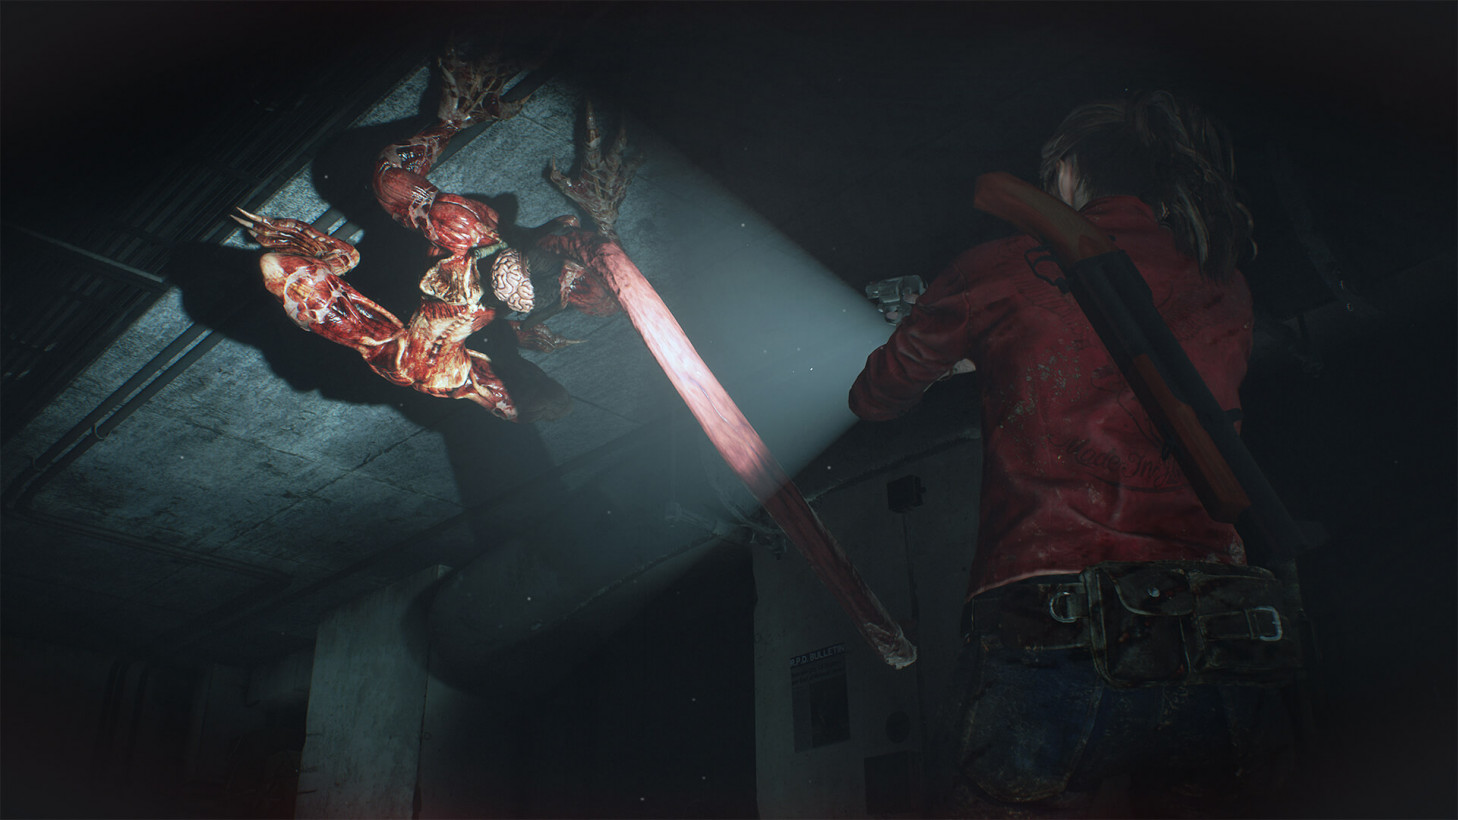 Review: Resident Evil 2 raises the bar for survival horror and video games  as a whole - MSPoweruser